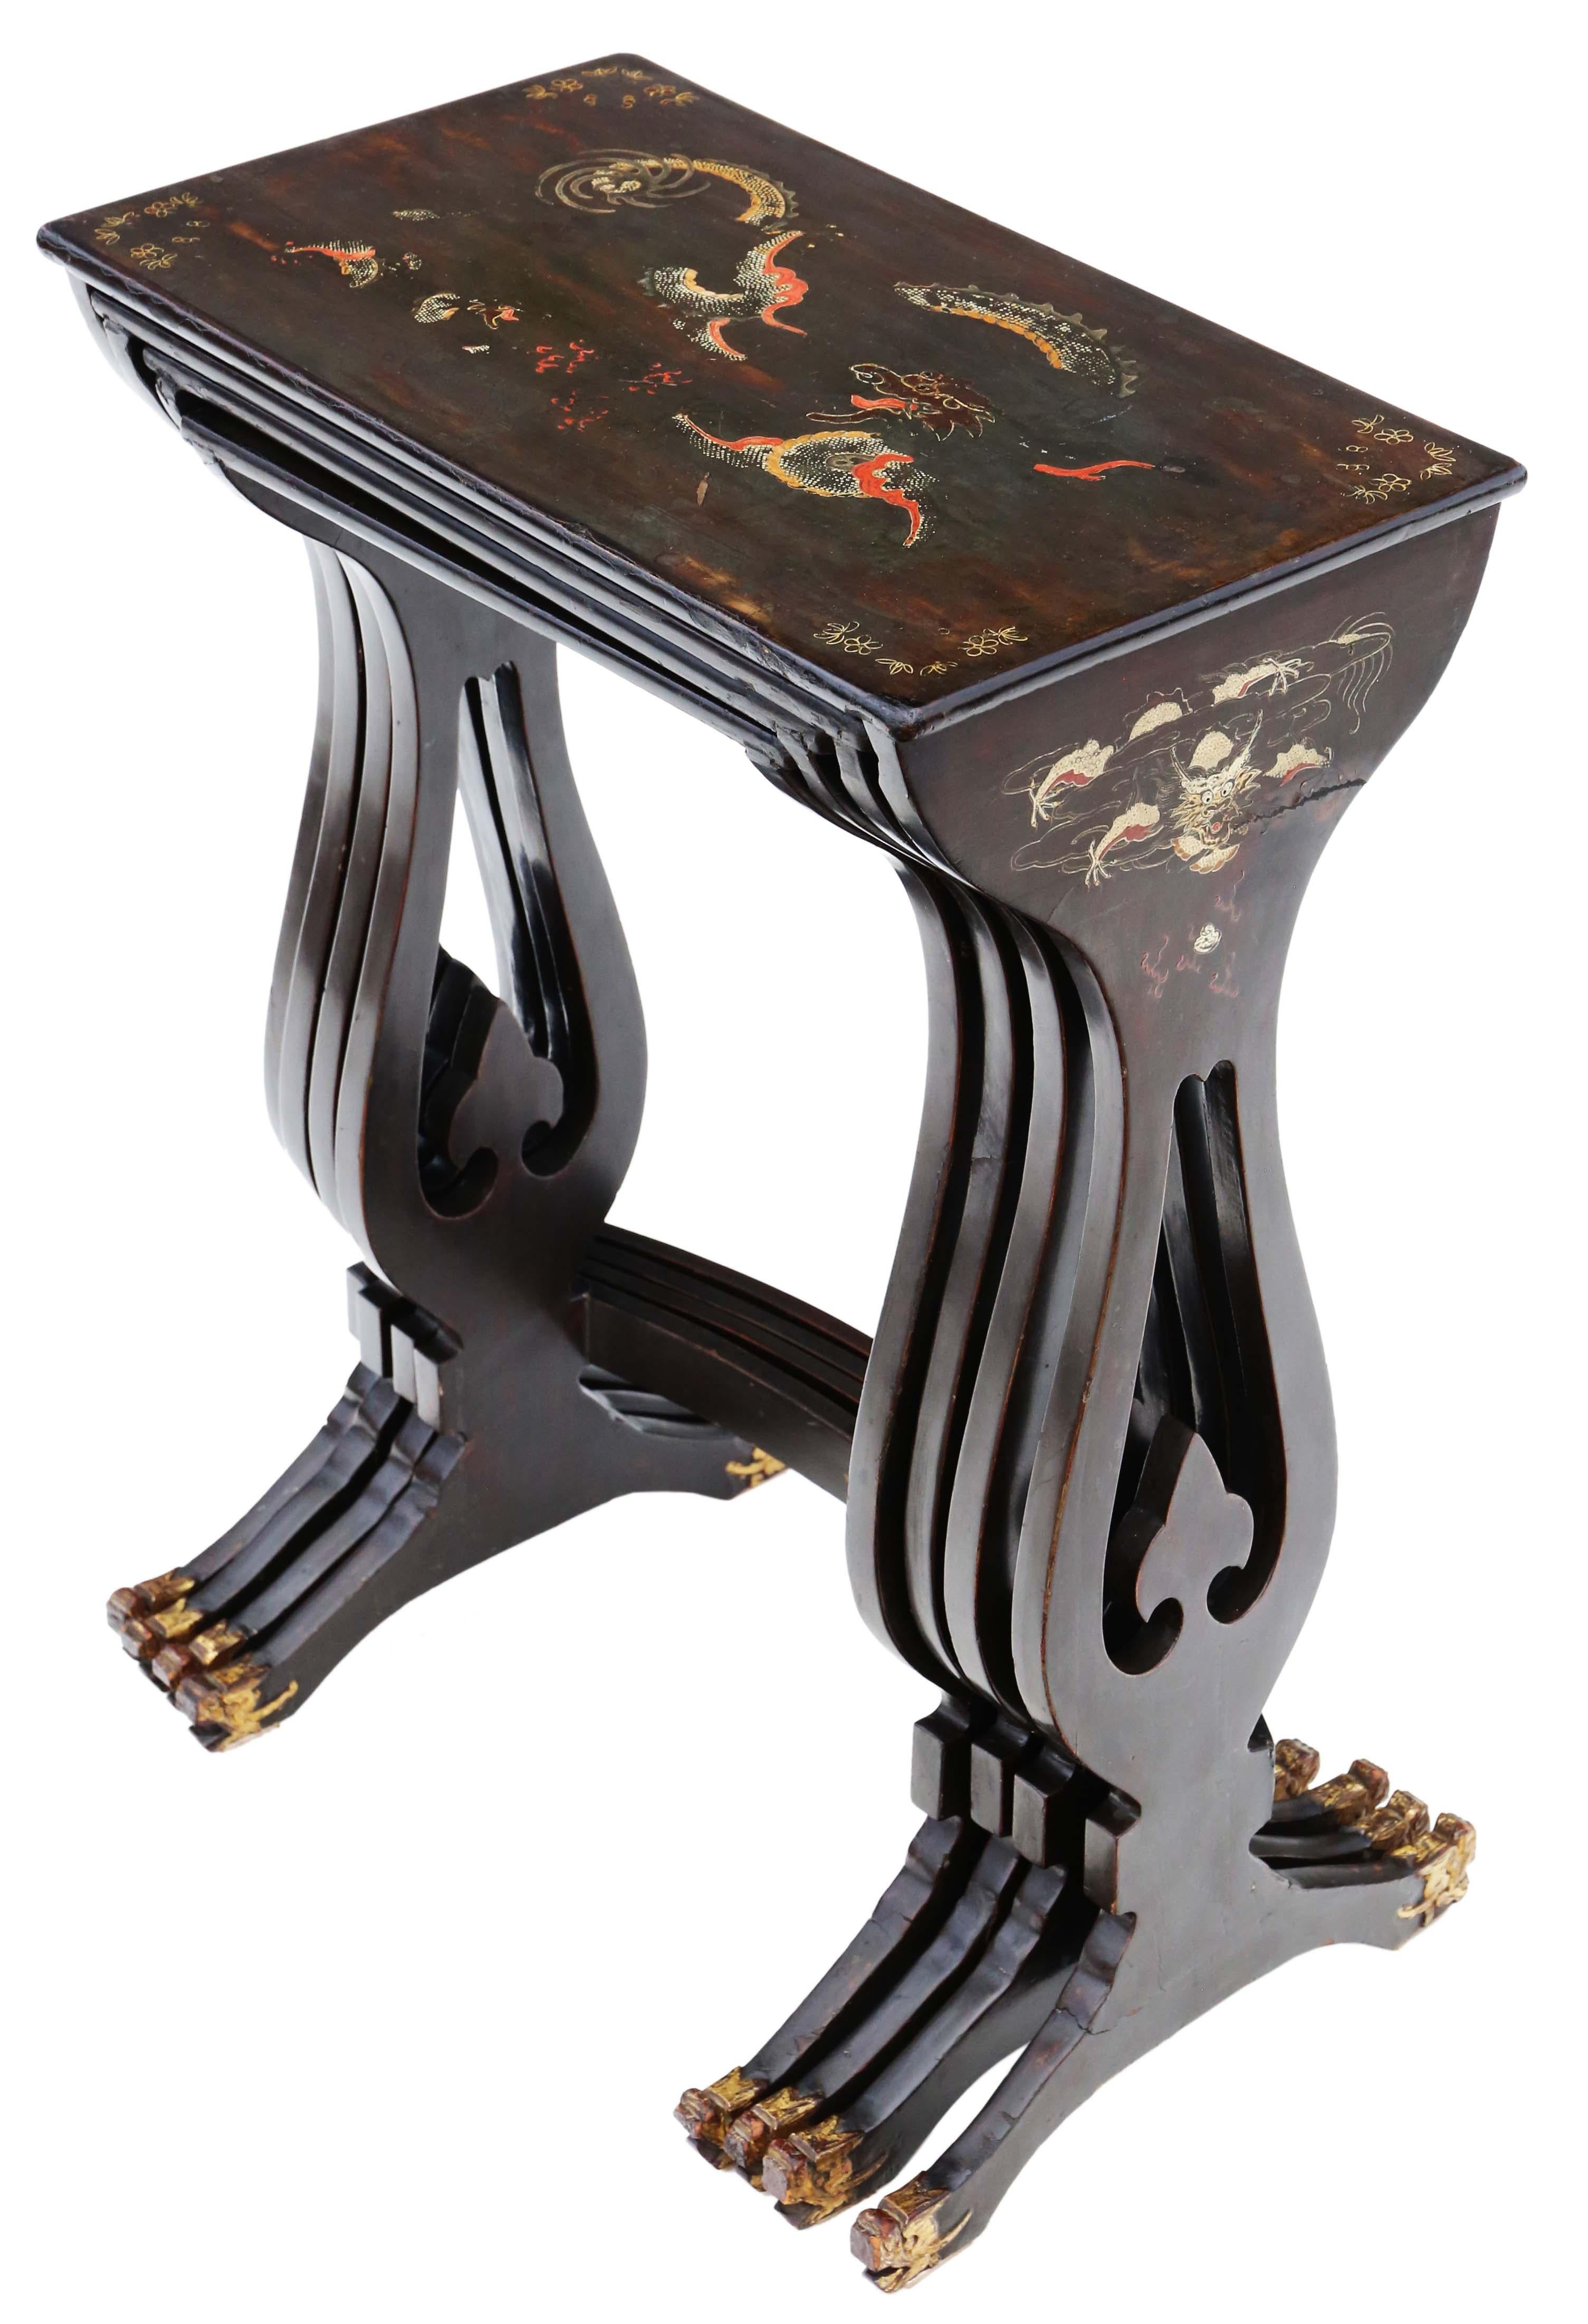 Antique fine quality Chinoiserie decorated black lacquer nest of 4 late 19th Century tables.
 
Very attractive, with lovely proportions and styling. A rare find.
 
No loose joints or woodworm.
Overall maximum dimensions:

54cmW x 30cmD x 69cm high,